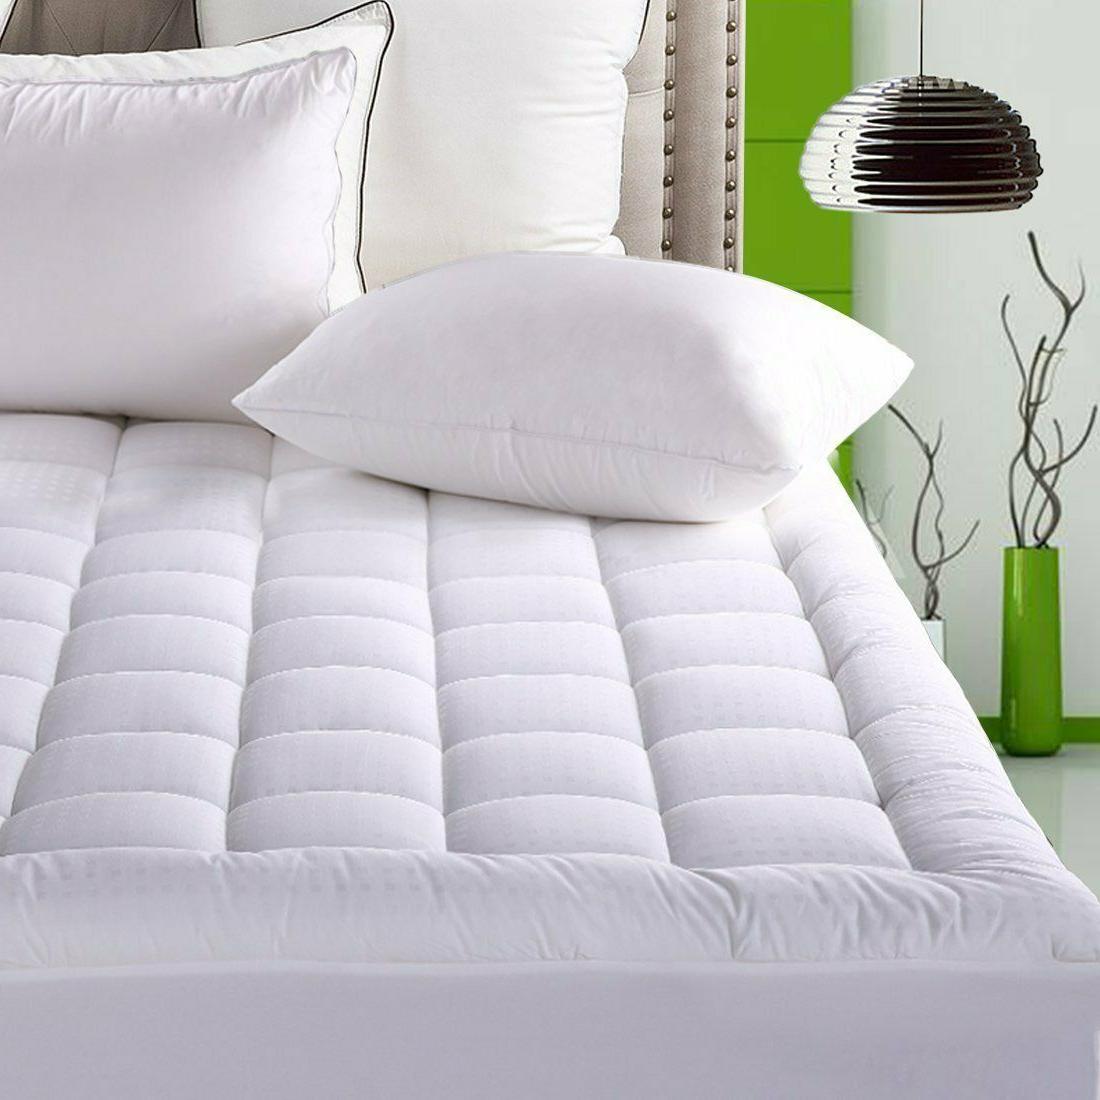 Pillow Top Mattress Pad King Size Bed Topper